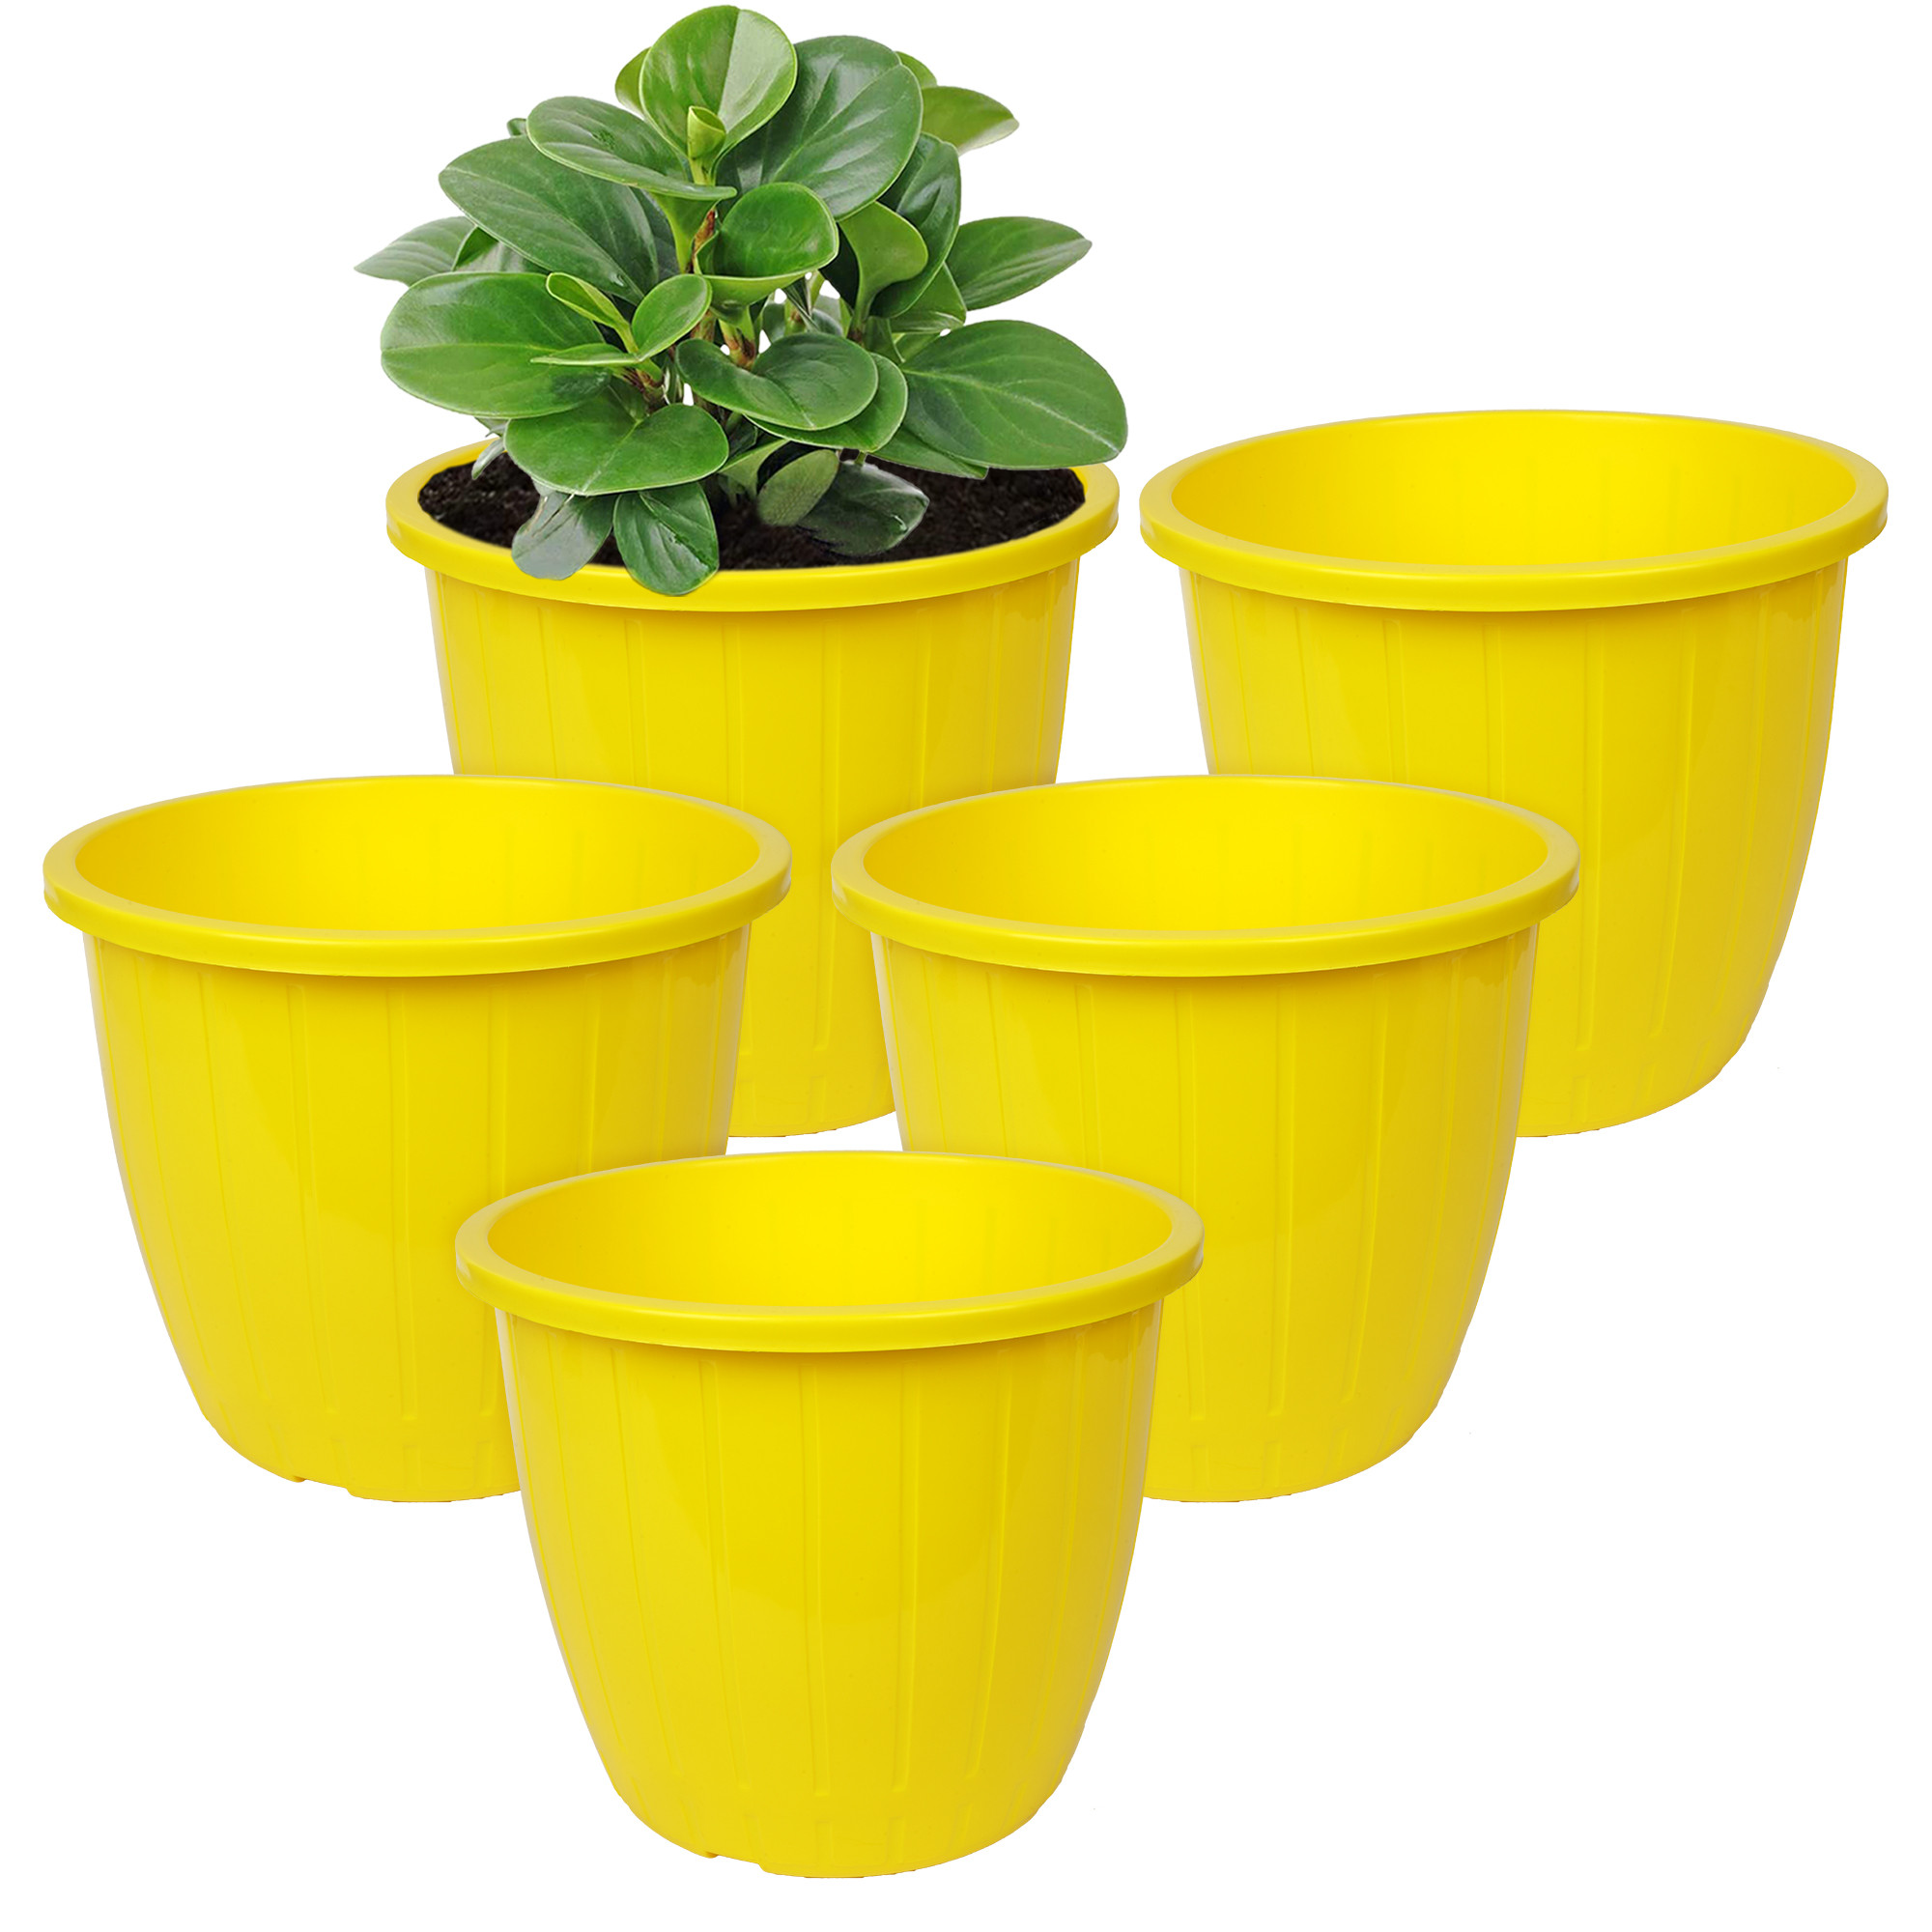 Kuber Industries Flower Pot | Flower Pots for Indoor & Outdoor | Plastic Pot for Gardening | Planter for Flower | Balcony Flower Pot with Drain Holes | Duro Flower Pot | 6 Inch |Yellow